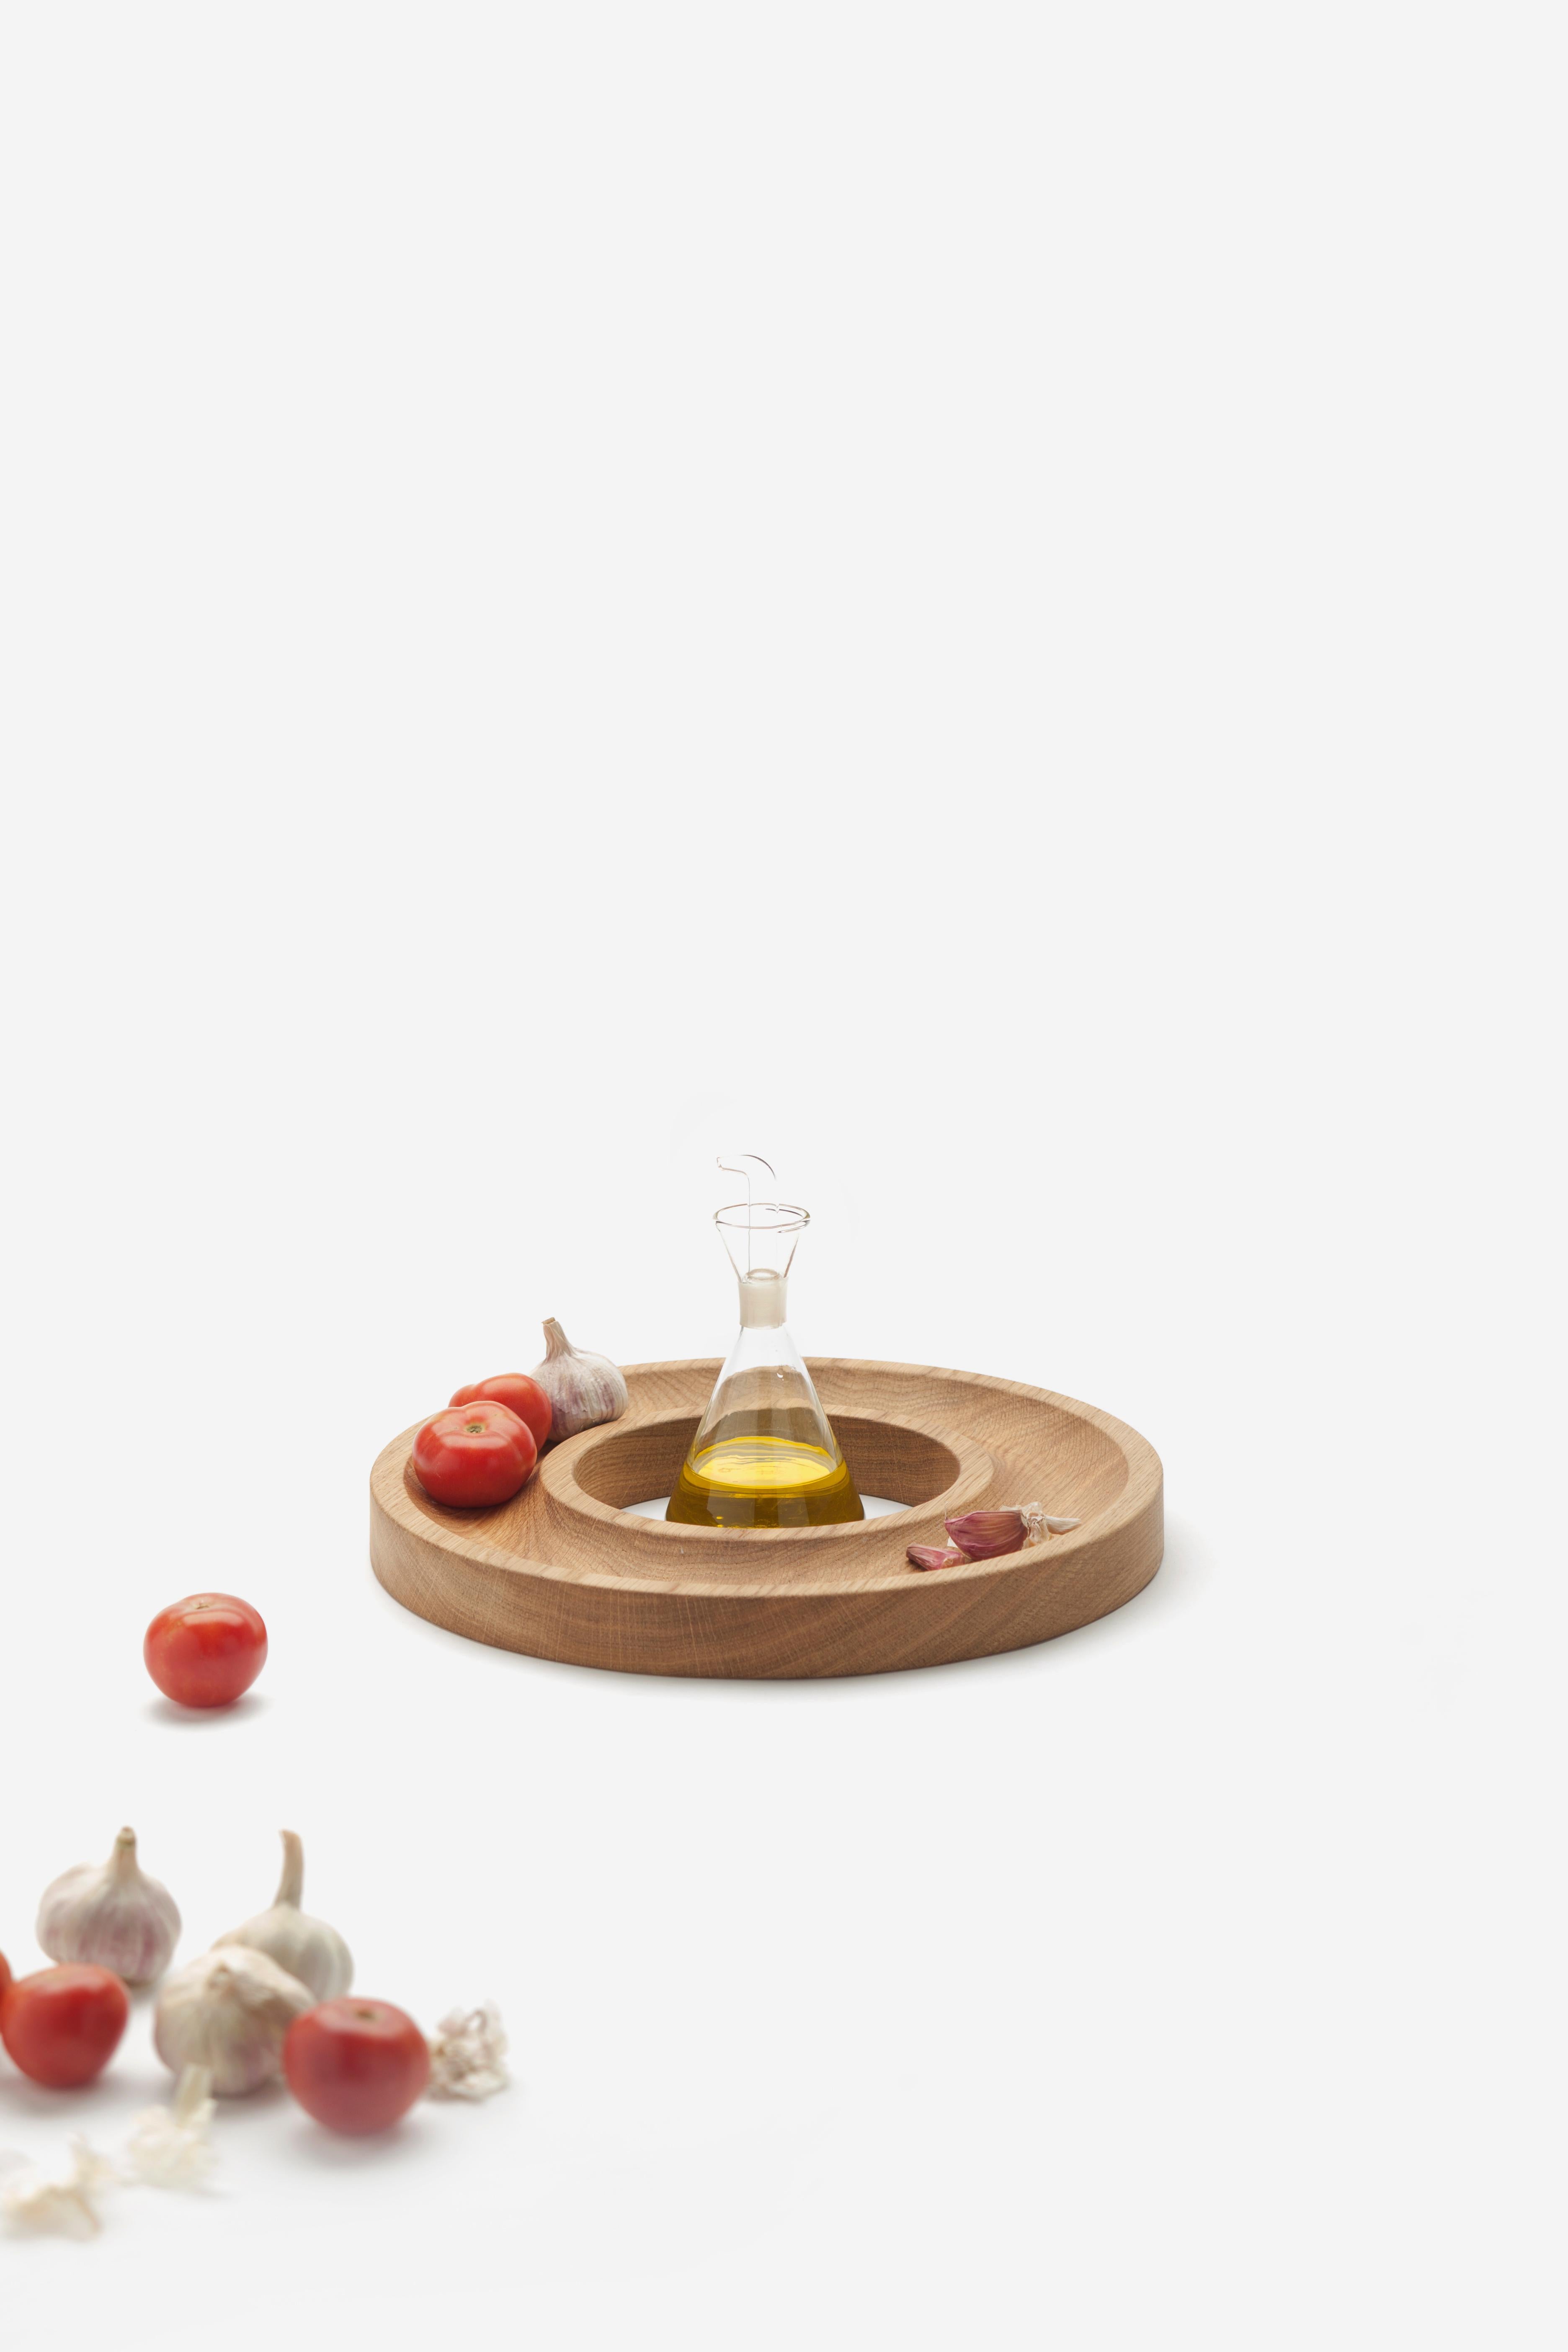 Oak ring tray by Joseph Vila Capdevila
Material: Oak
Dimensions: ø 35 x 3 cm
Weight: 1.25 kg

Aparentment is a space for creation and innovation, experimenting with materials with the goal to develop robust, lasting and timeless